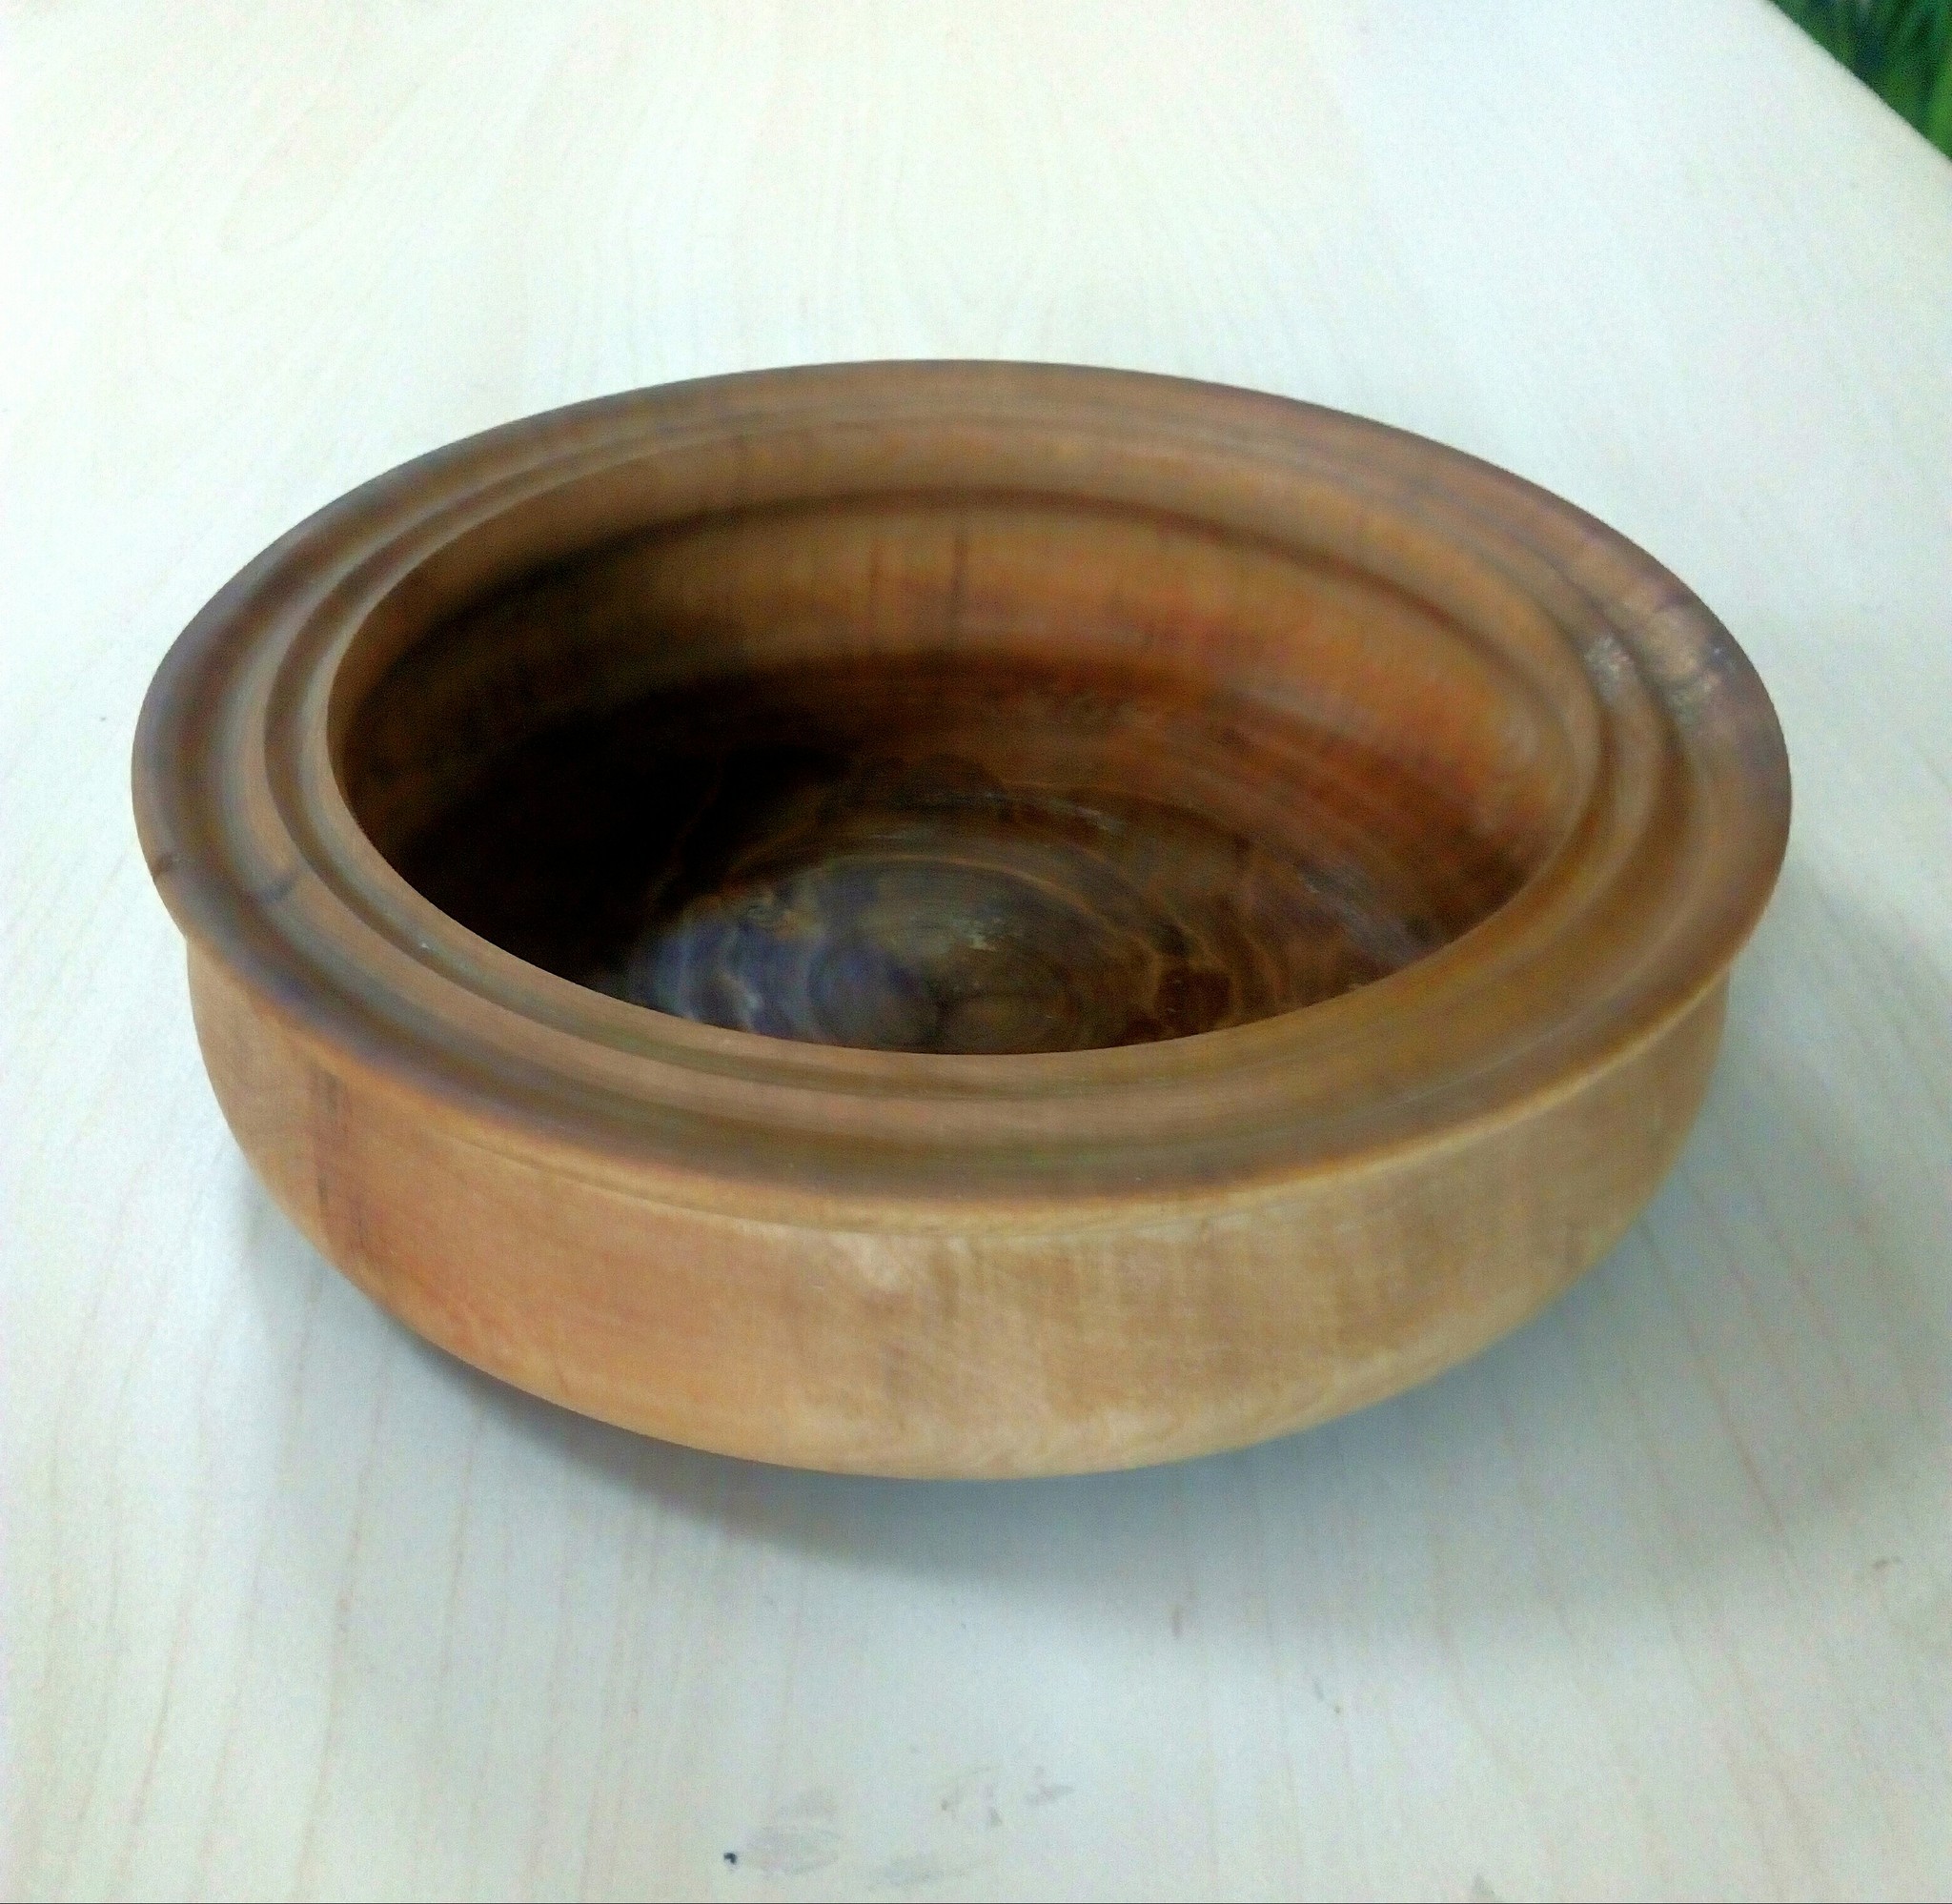 A bowl for all good things. - My, Turning machine, Needlework without process, Woodworking, Needlemen, Decor, Longpost